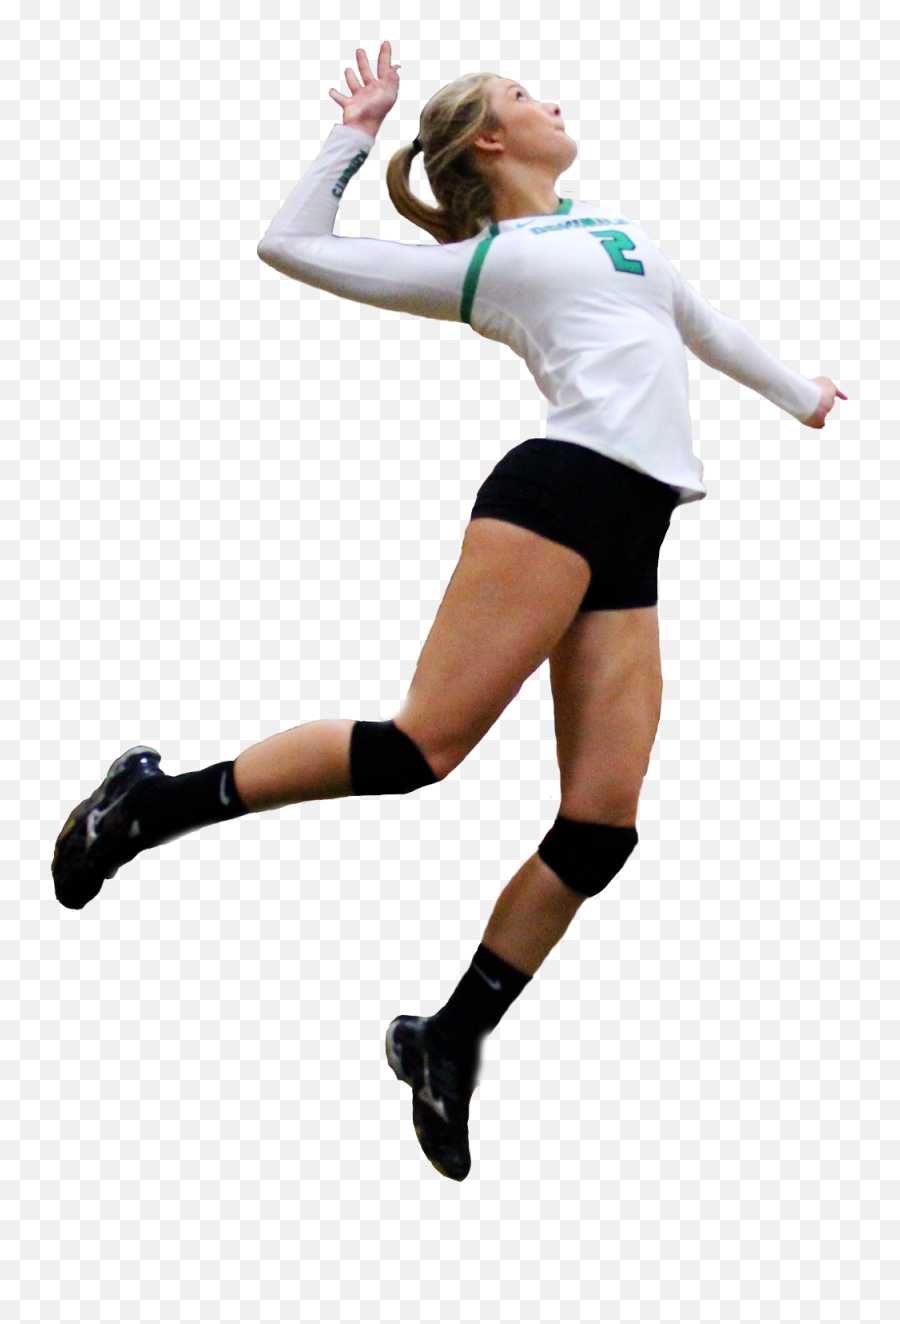 Volleyball Player Png Free - Volleyball Player Png,Volleyball Player Png